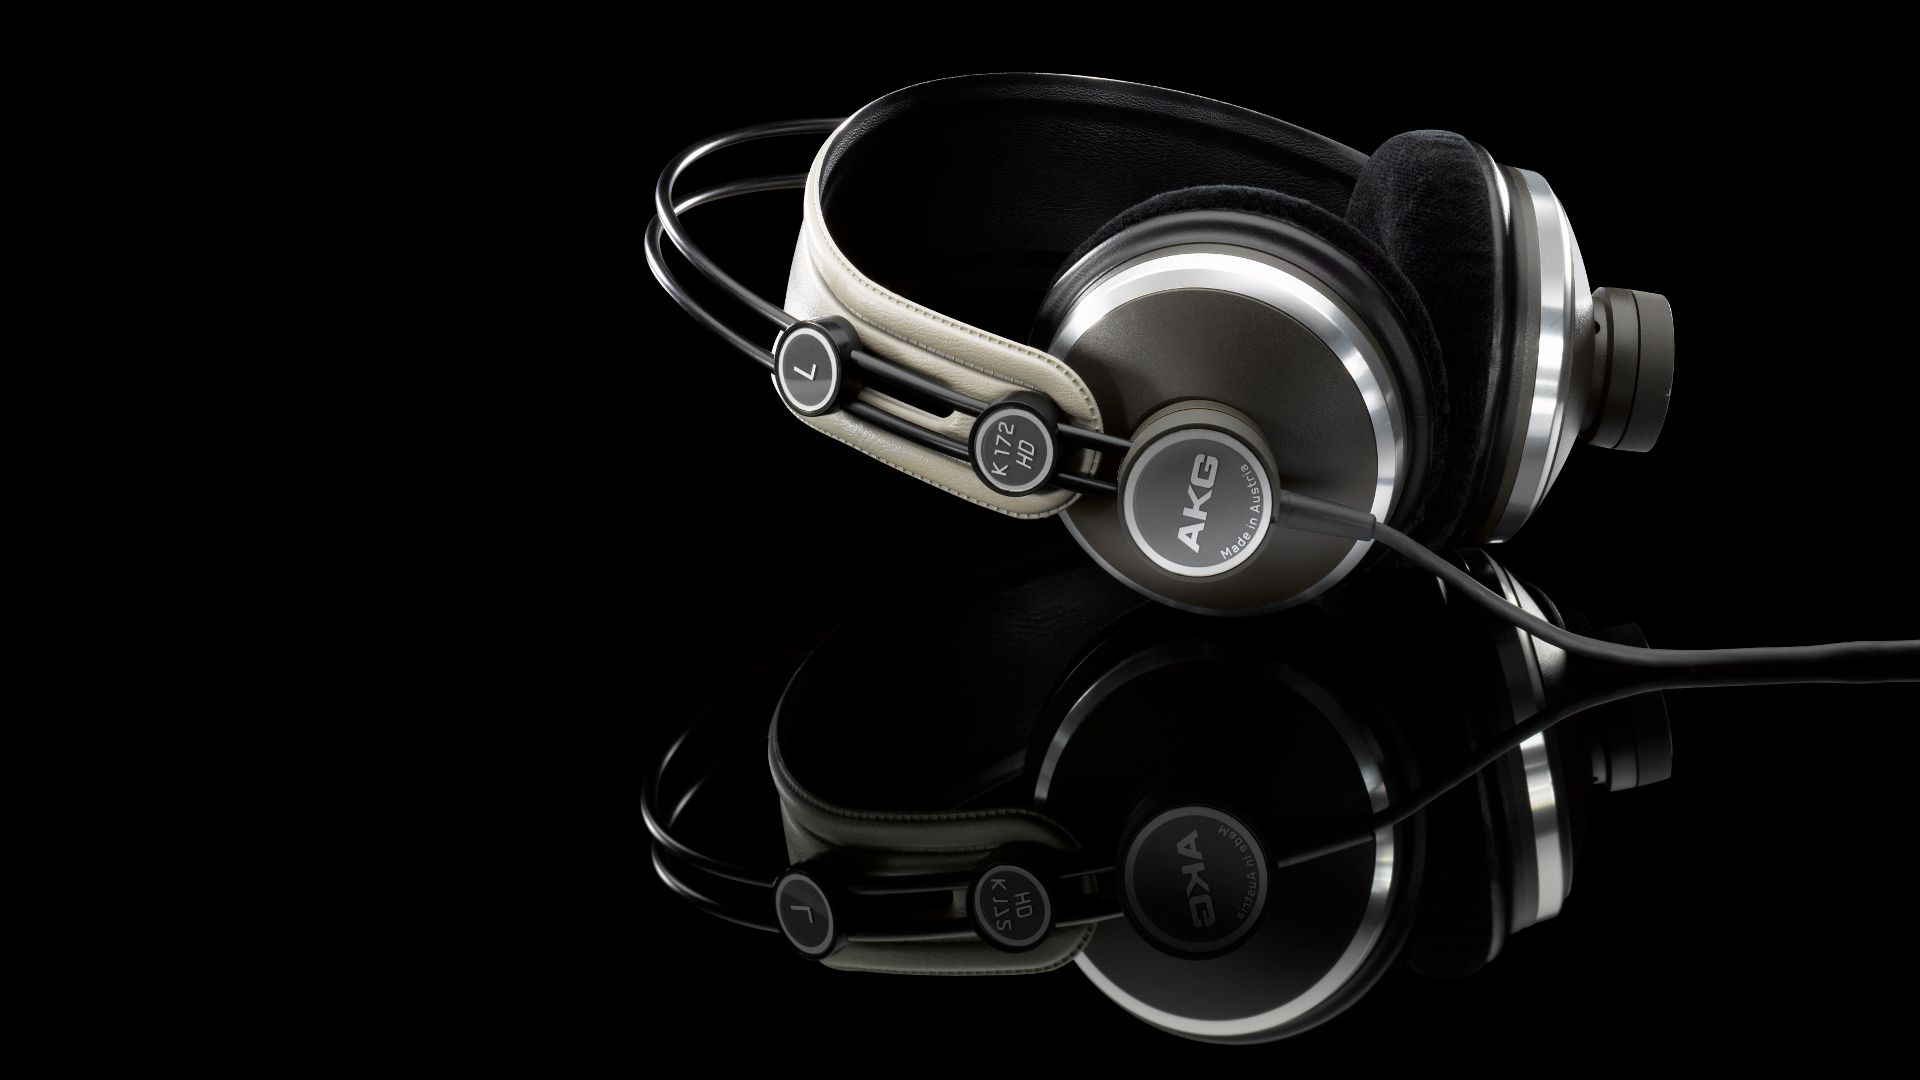 HD Image Cool Headphones Collection Headphone In